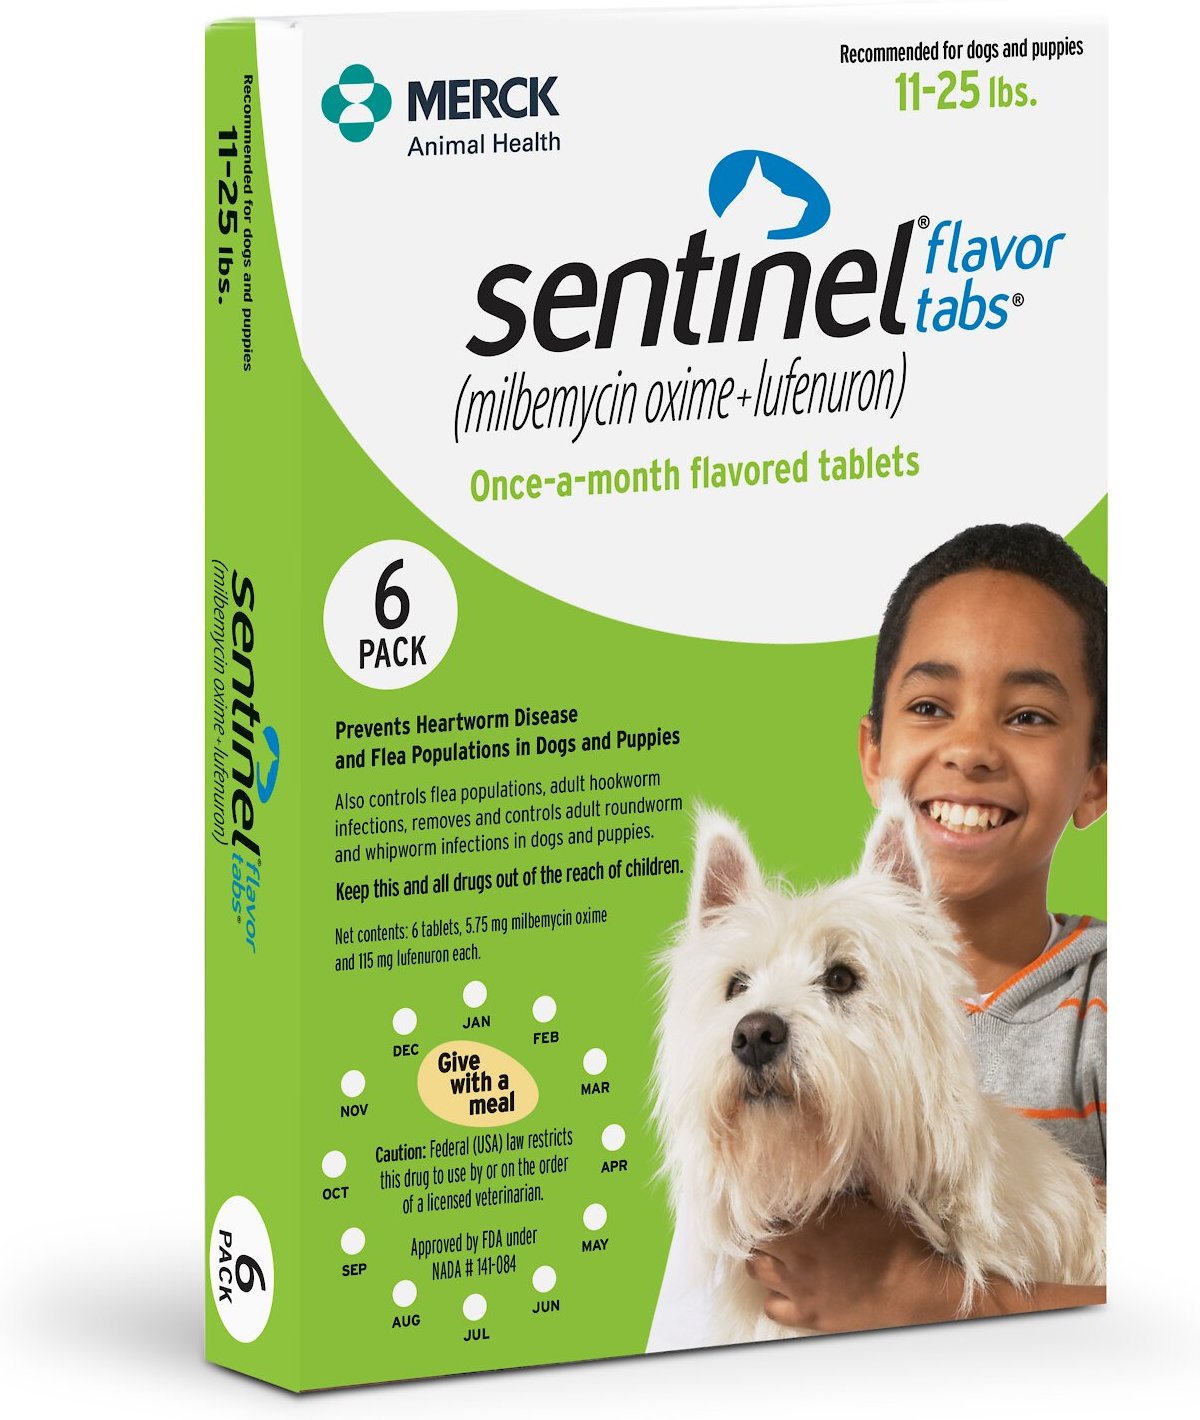 cheapest sentinel spectrum for dogs